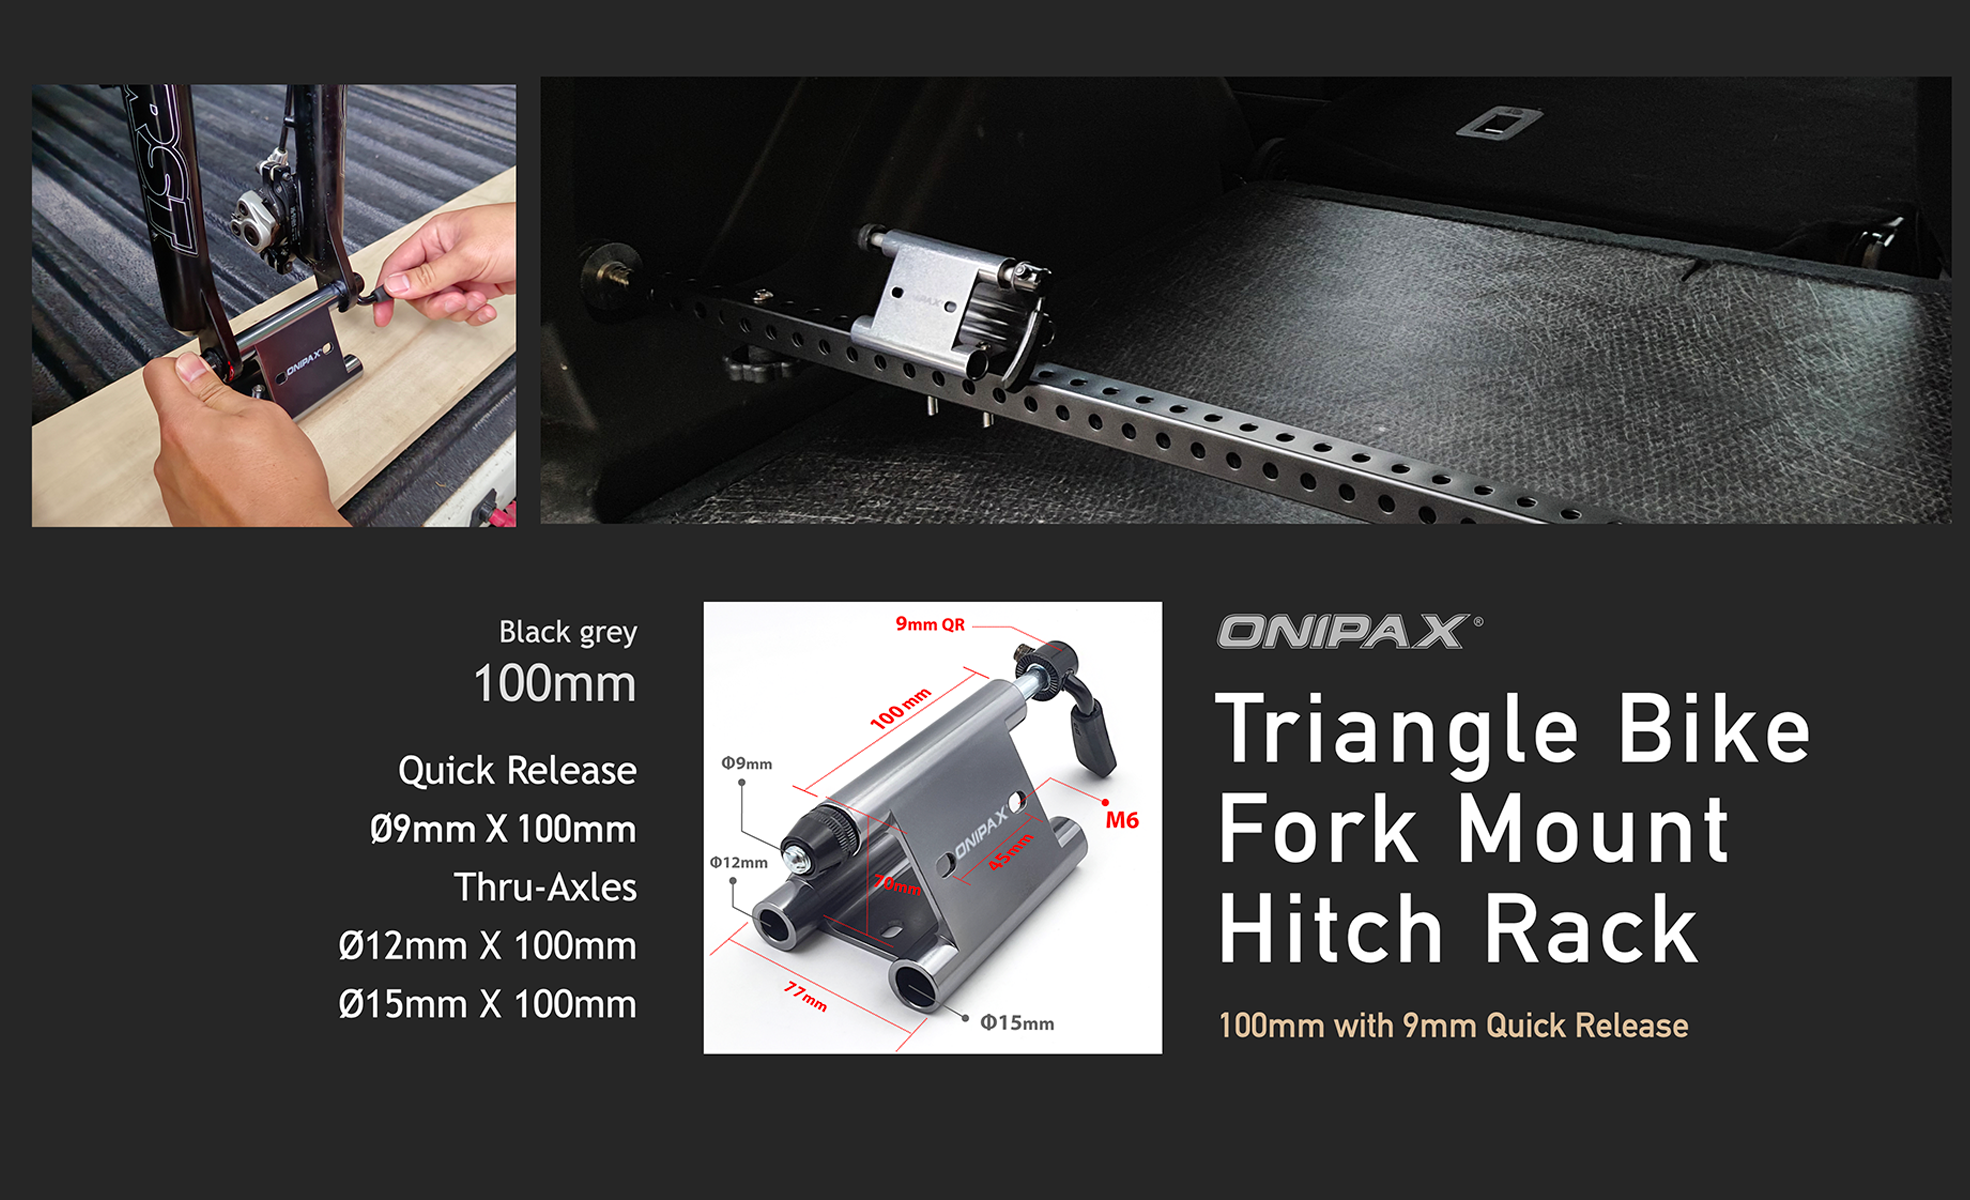 Onipax Triangle Bike Fork Mount Hitch Rack 100mm with 9mm Quick Release